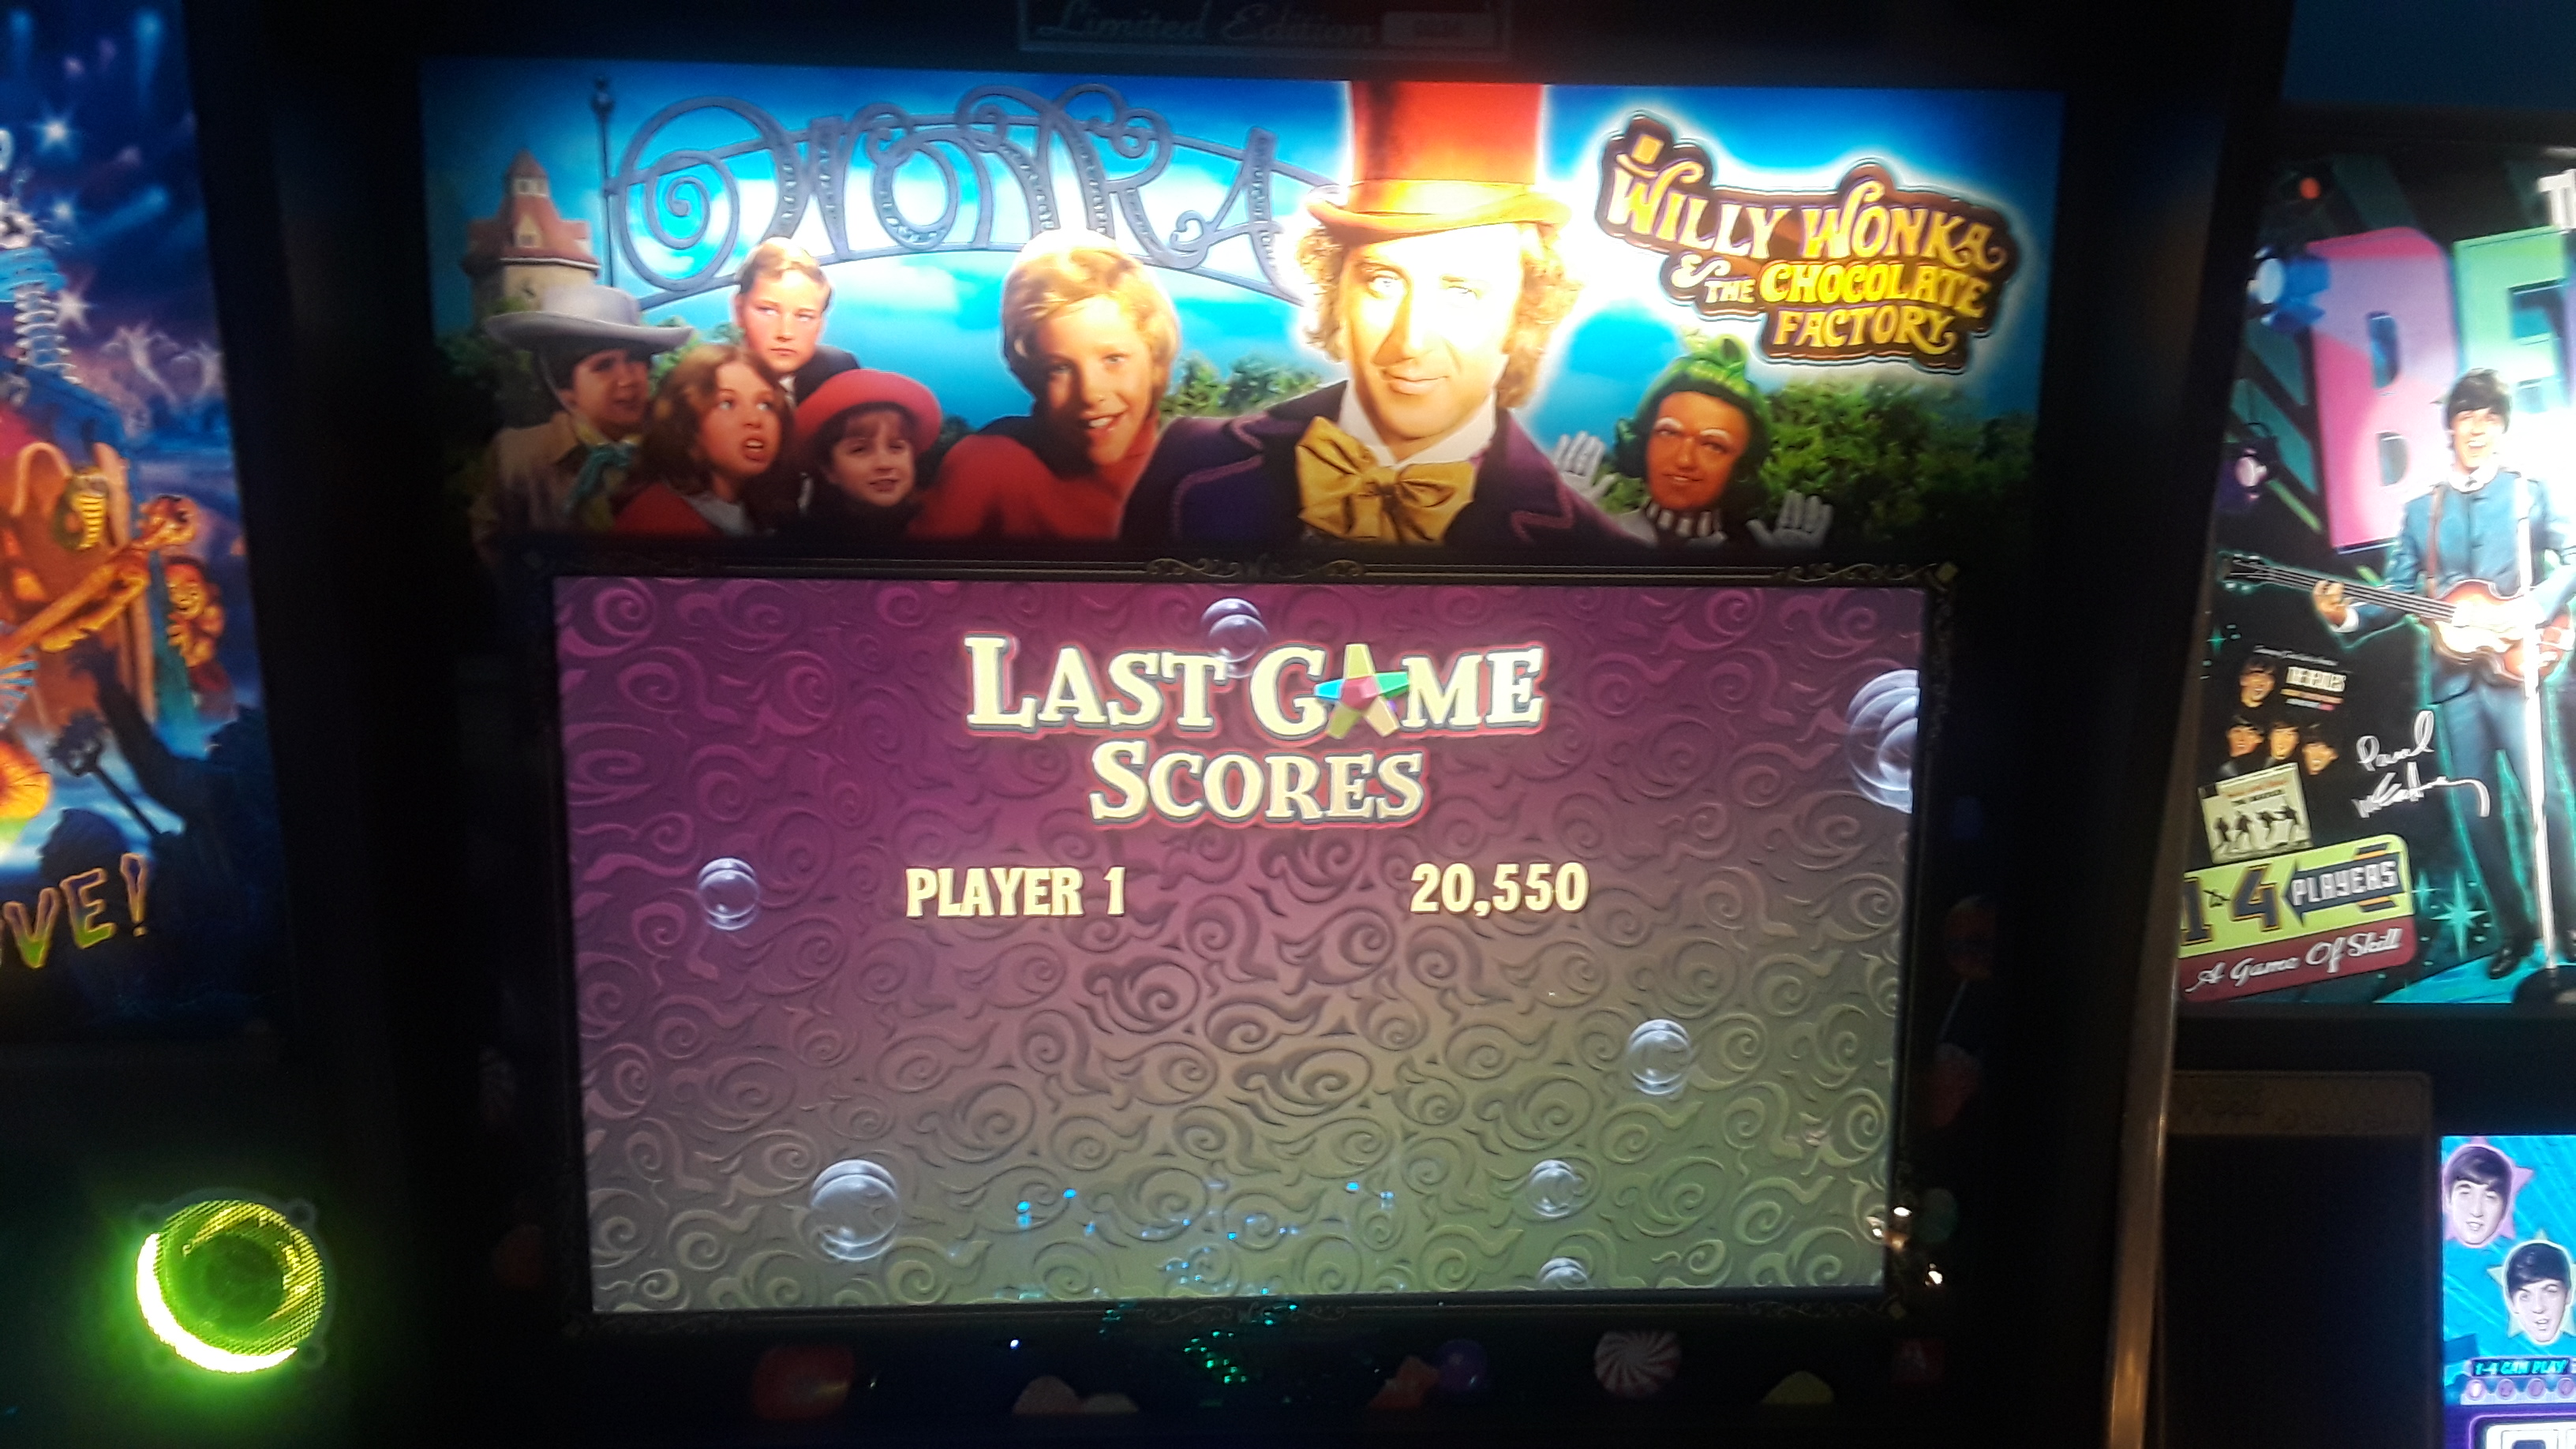 JML101582: Willy Wonka And The Chocolate Factory [LE] (Pinball: 3 Balls) 20,550 points on 2019-11-24 15:53:09